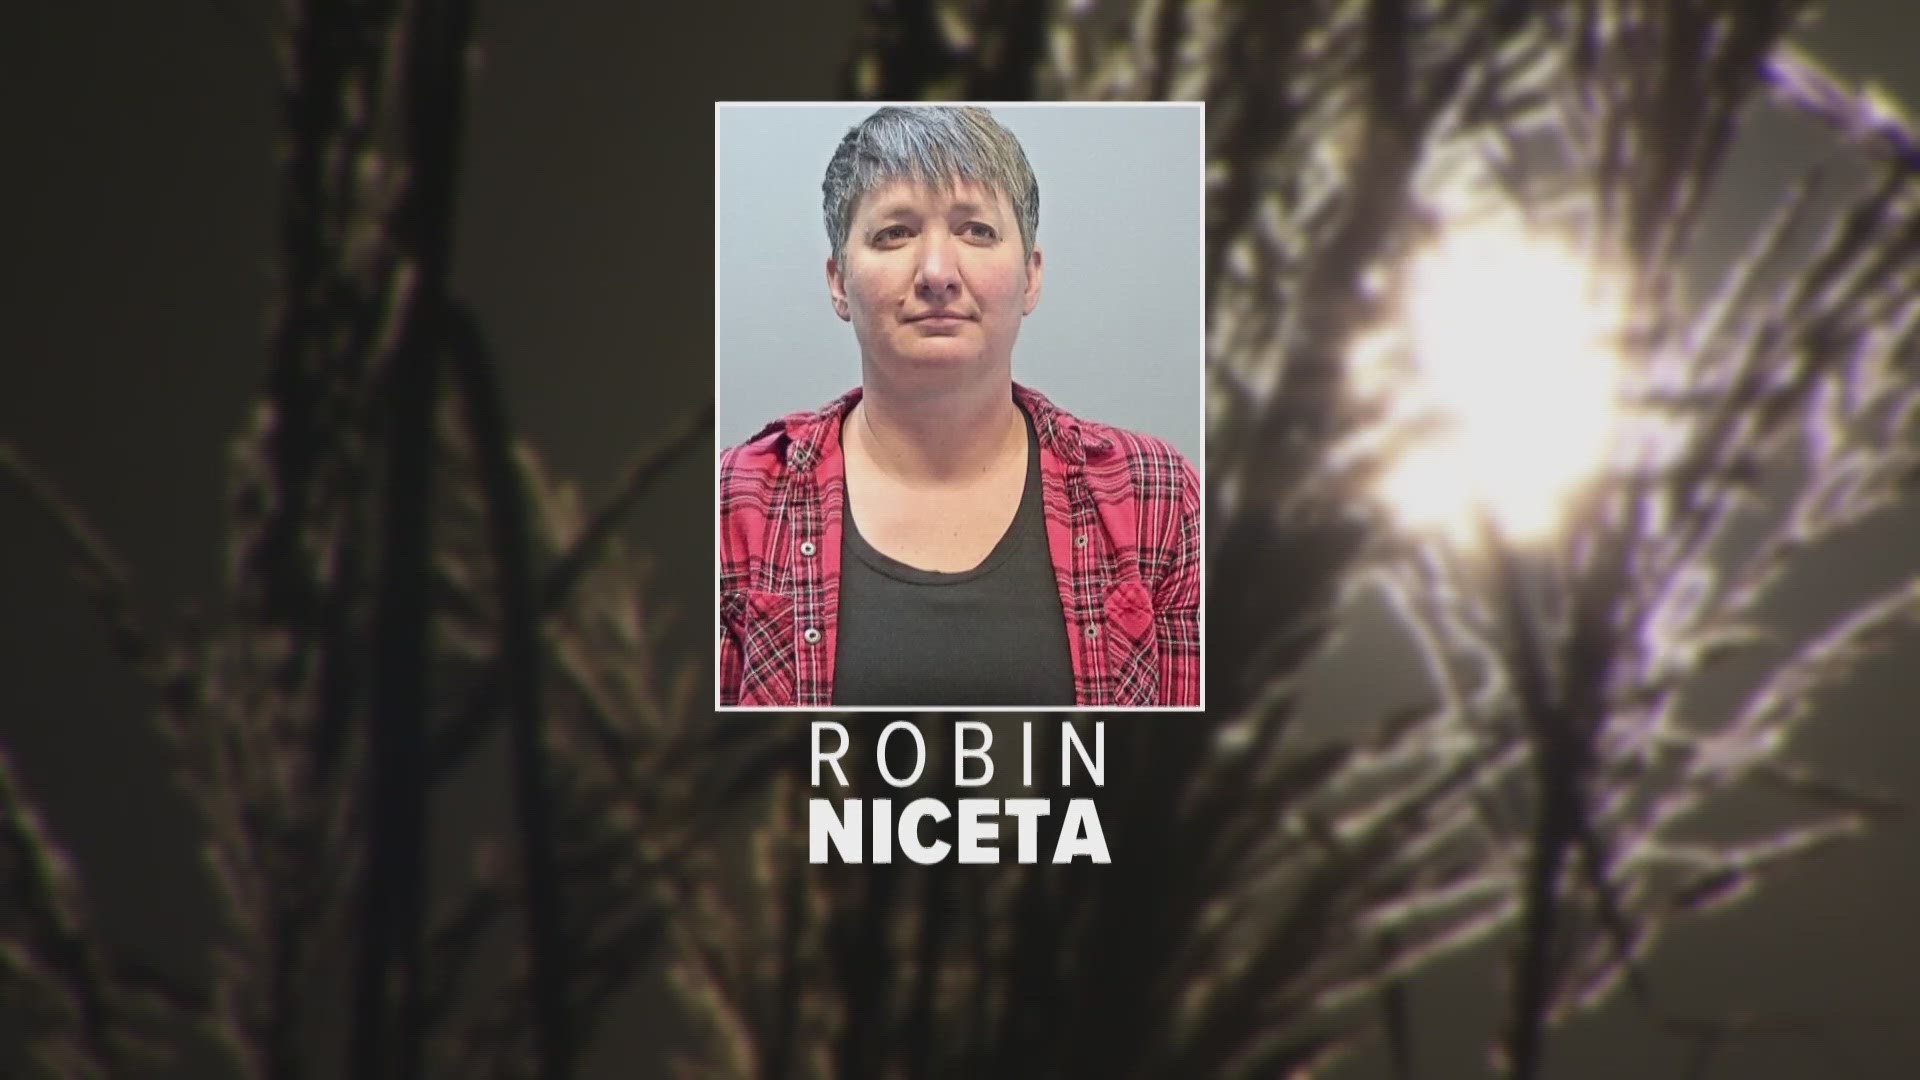 Prosecutors said MRI photos provided by Robin Niceta were "stock images" and they were unable to find the doctor who signed her medical records.